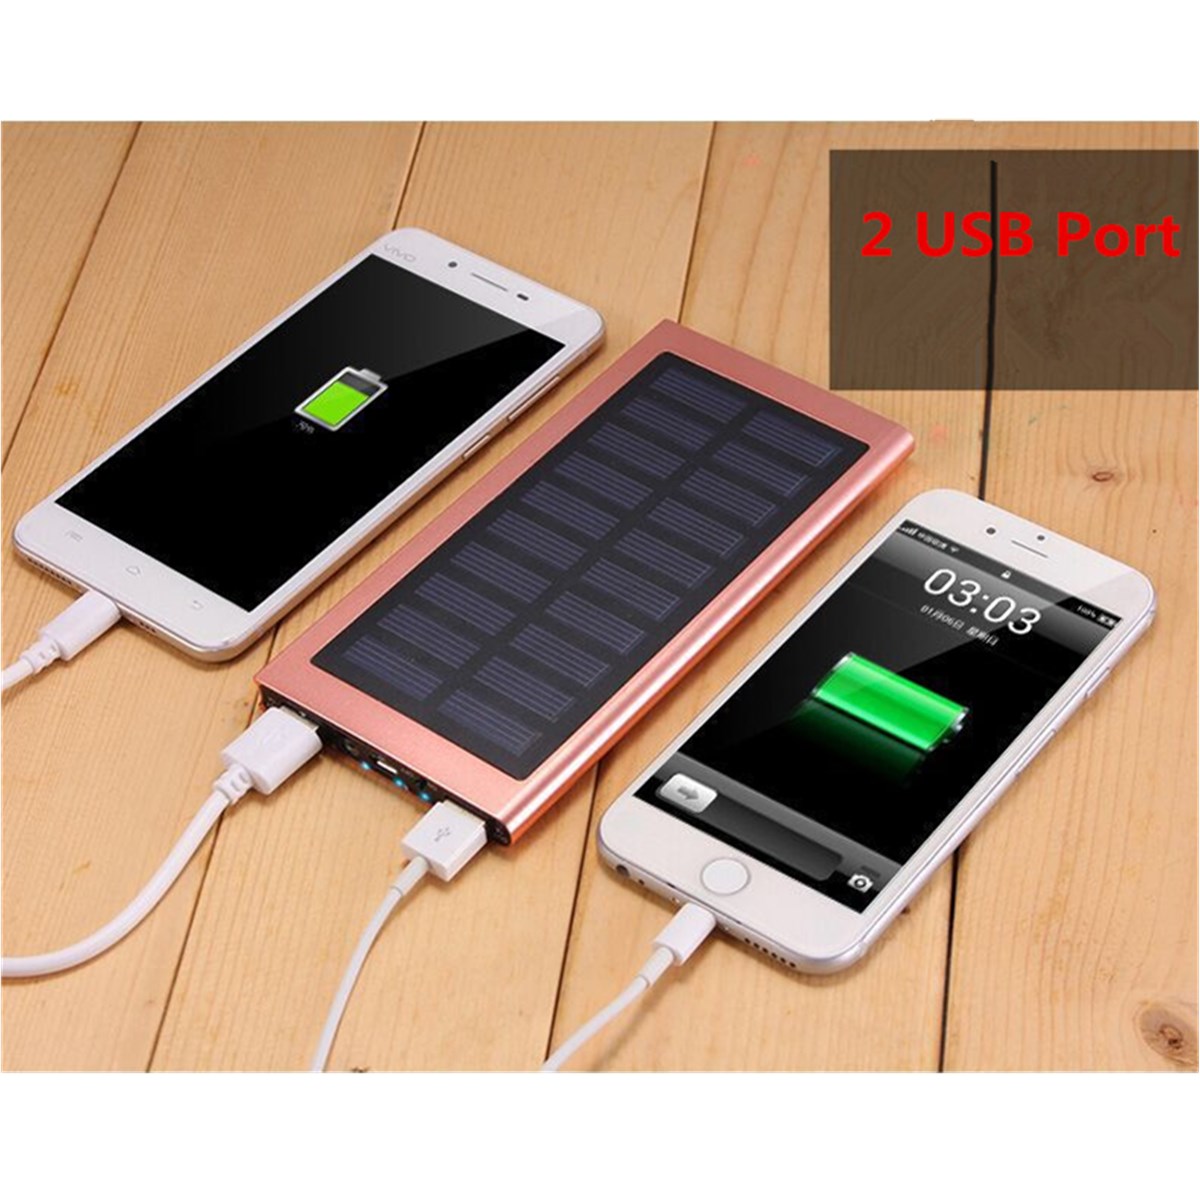 10000mAh-Portable-Solar-Power-Bank-Dual-USB-Fast-Charger-DIY-Case-For-Mobile-Phone-1233321